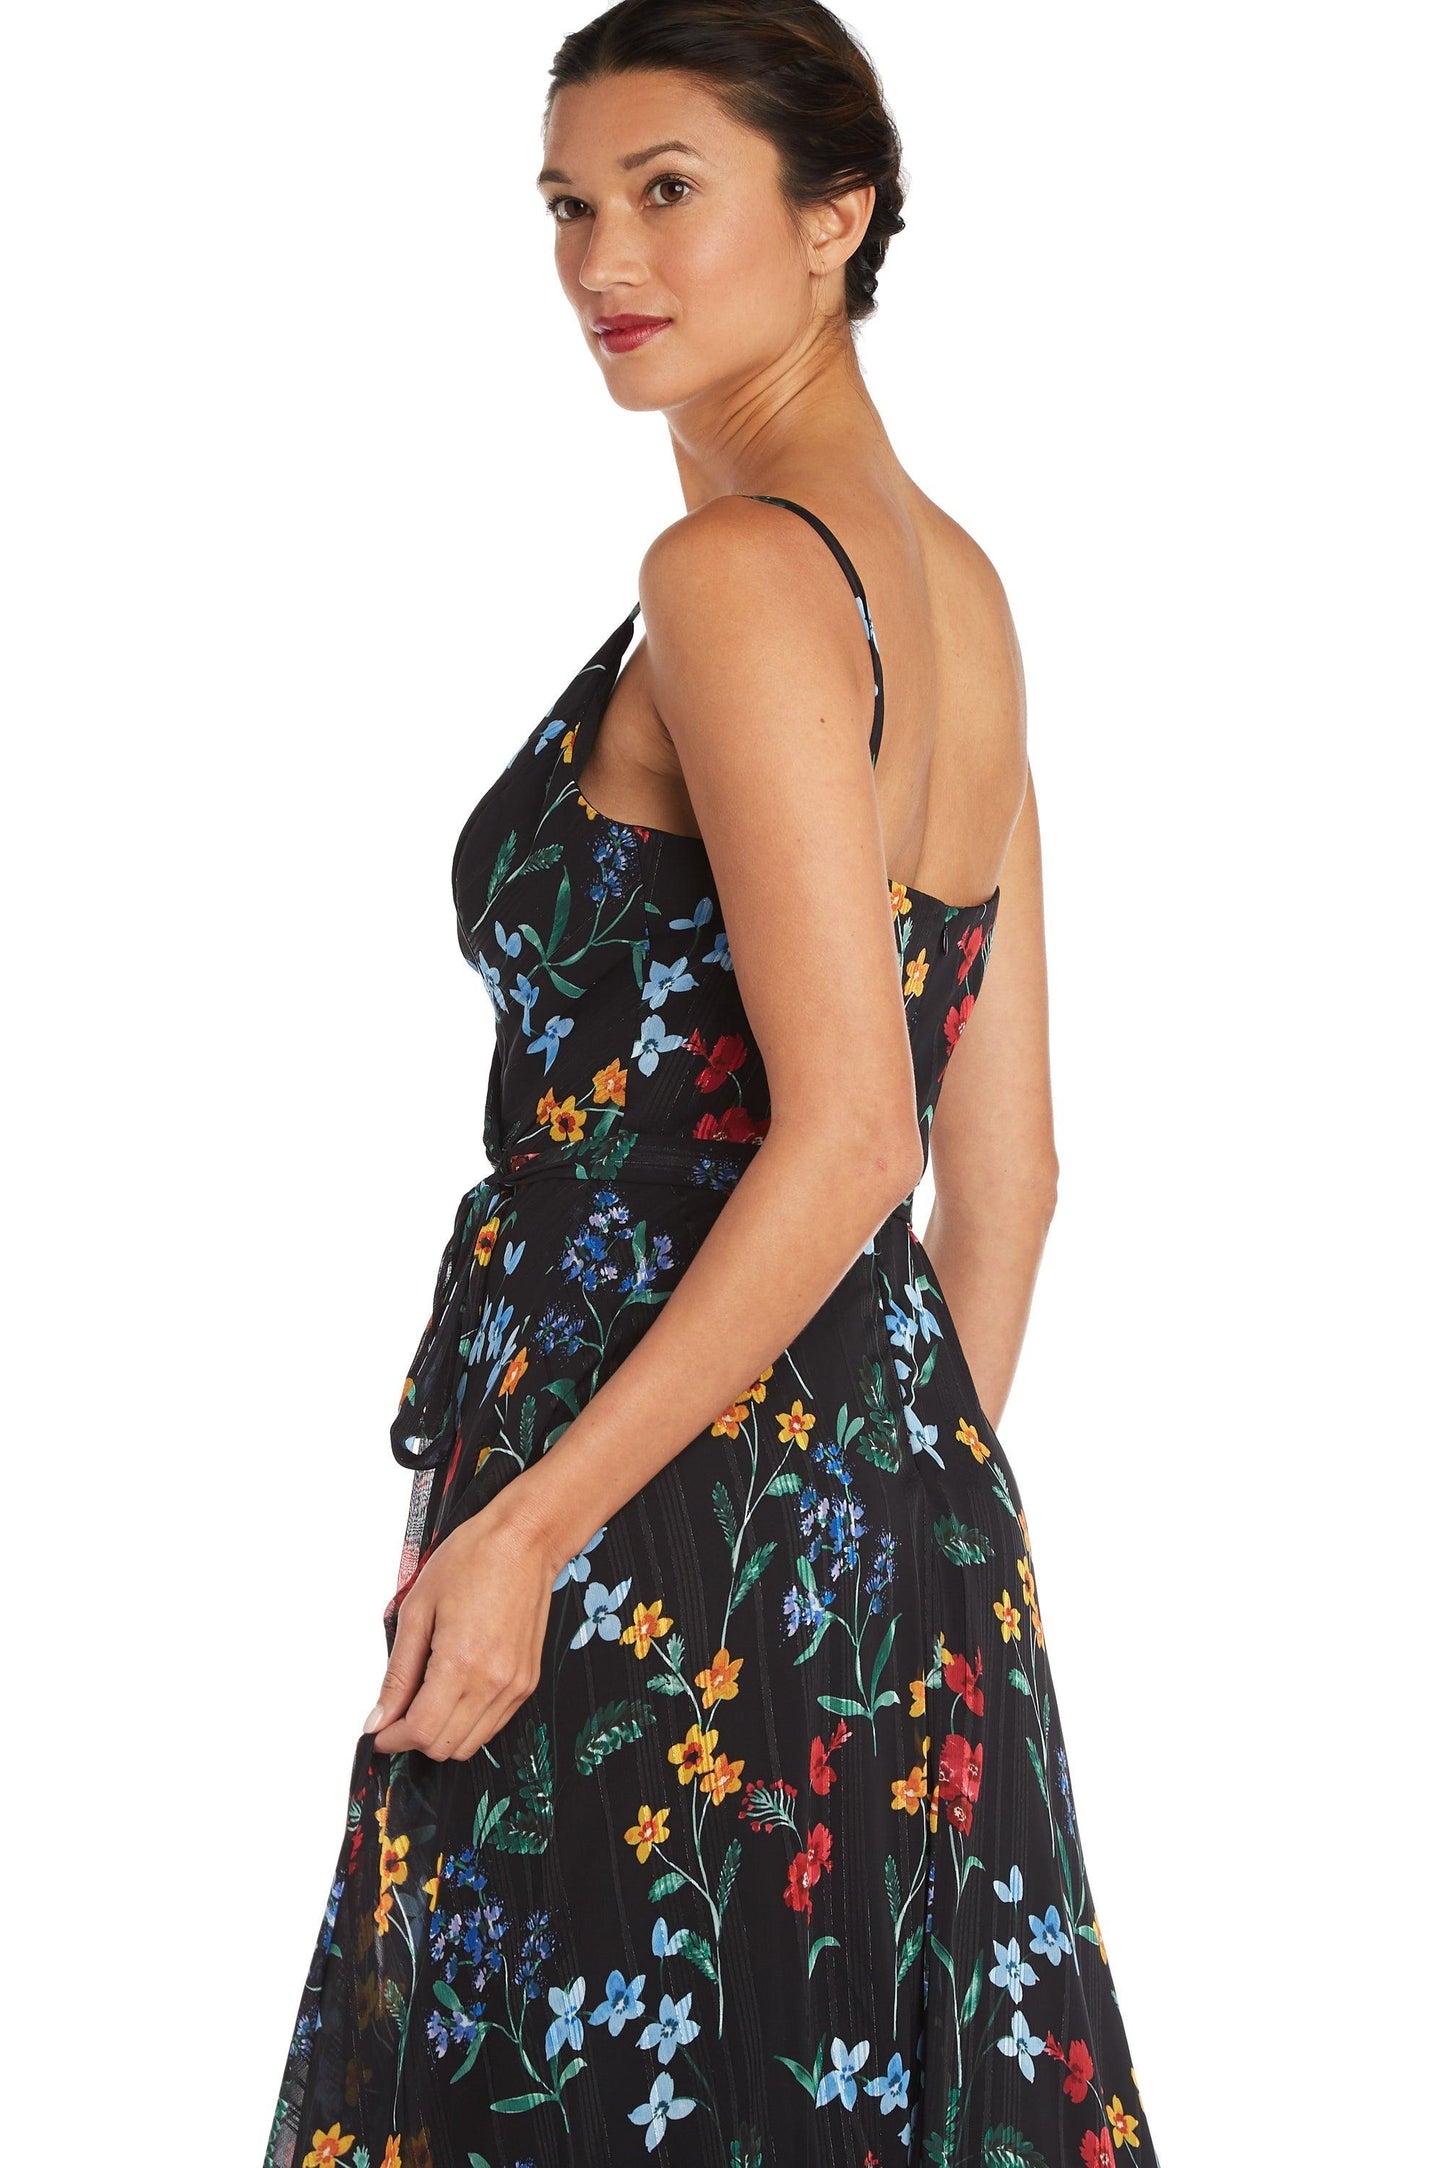 Nightway Long Spaghetti Strap Floral Dress 22040 - The Dress Outlet